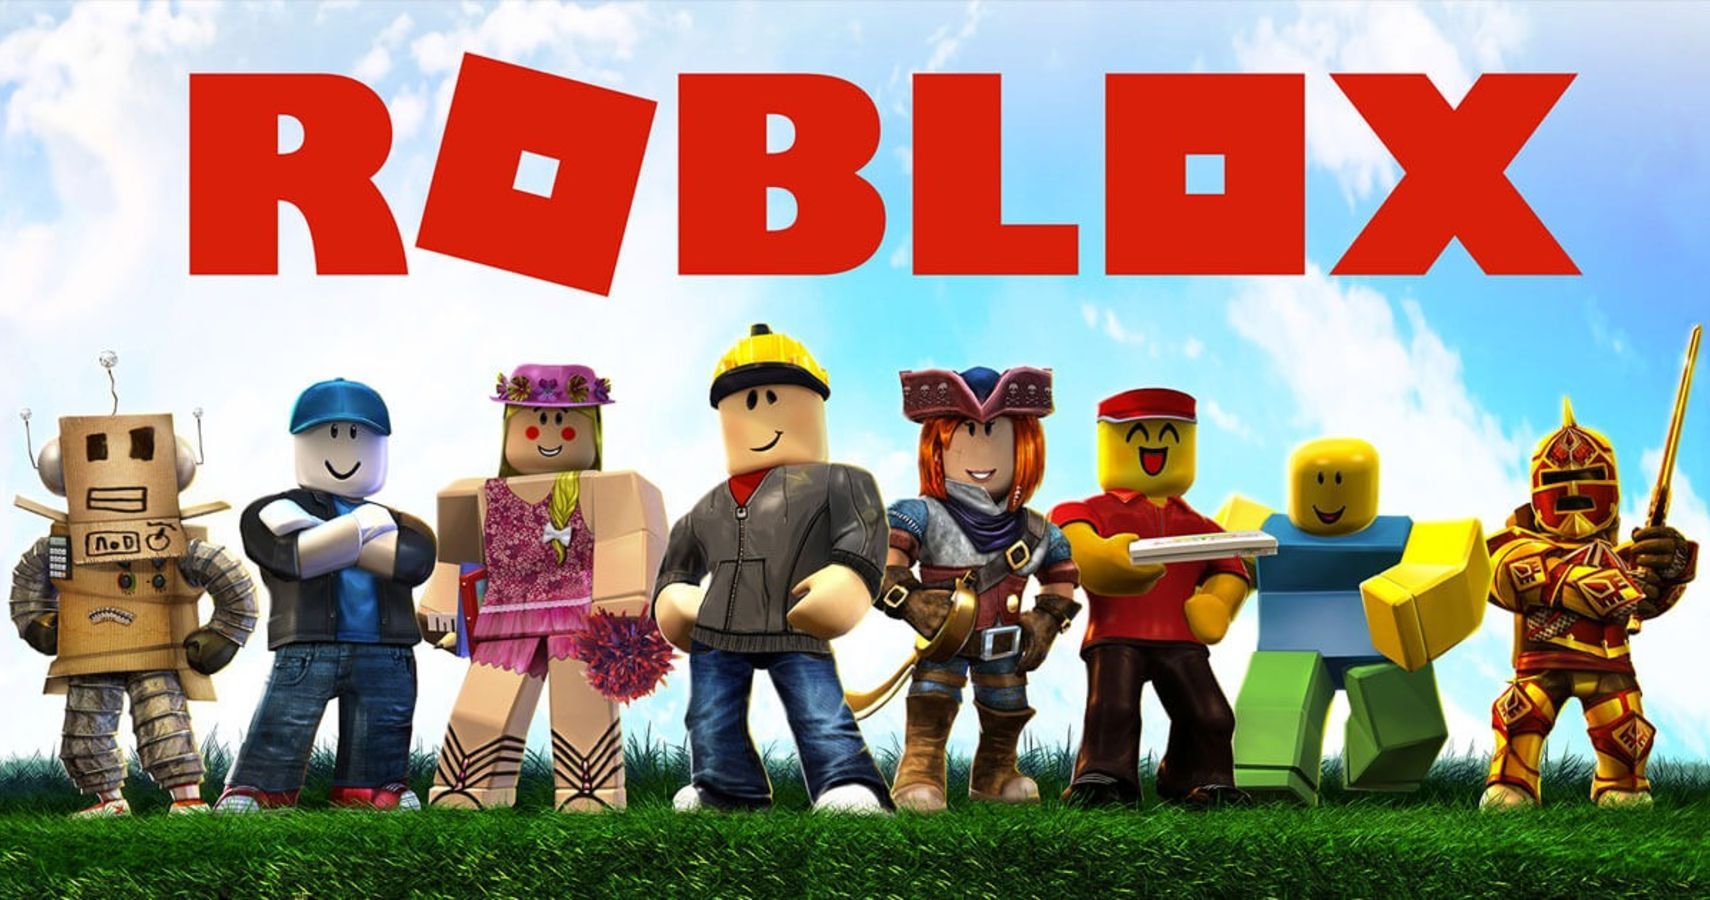 Mobile Simulation Games Made Over 2 Billion In 2020 (Led By Roblox